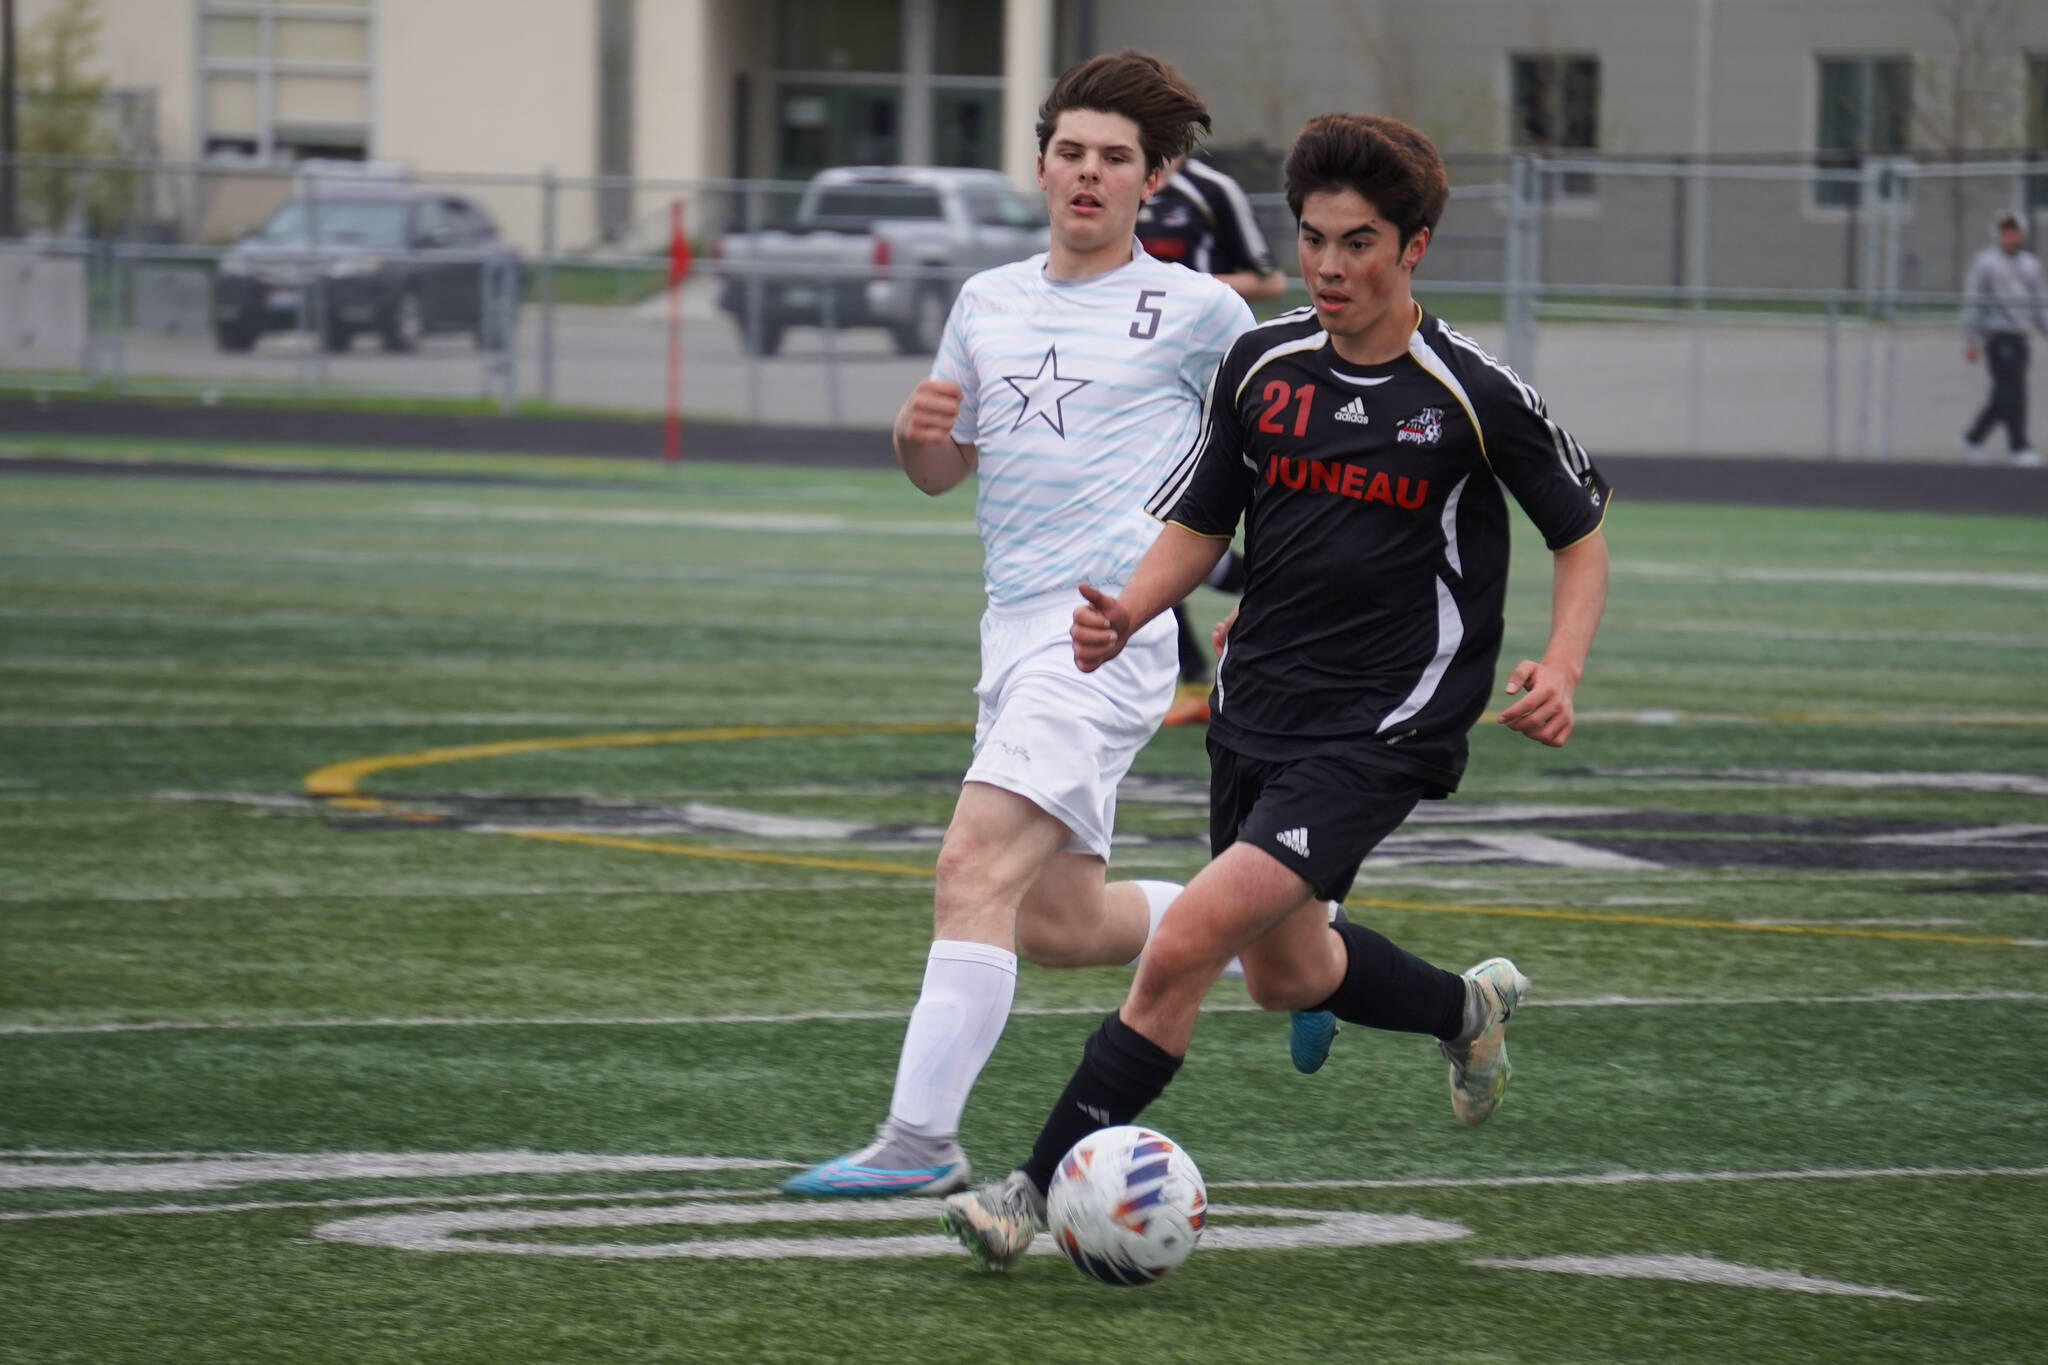 Soldotna’s Gehret Medcoff and Juneau-Douglas’ Gabriel Cheng race for the ball during the Division II Soccer State Championship on Saturday, May 27, 2023, at West Anchorage High School in Anchorage, Alaska. (Jake Dye/Peninsula Clarion)